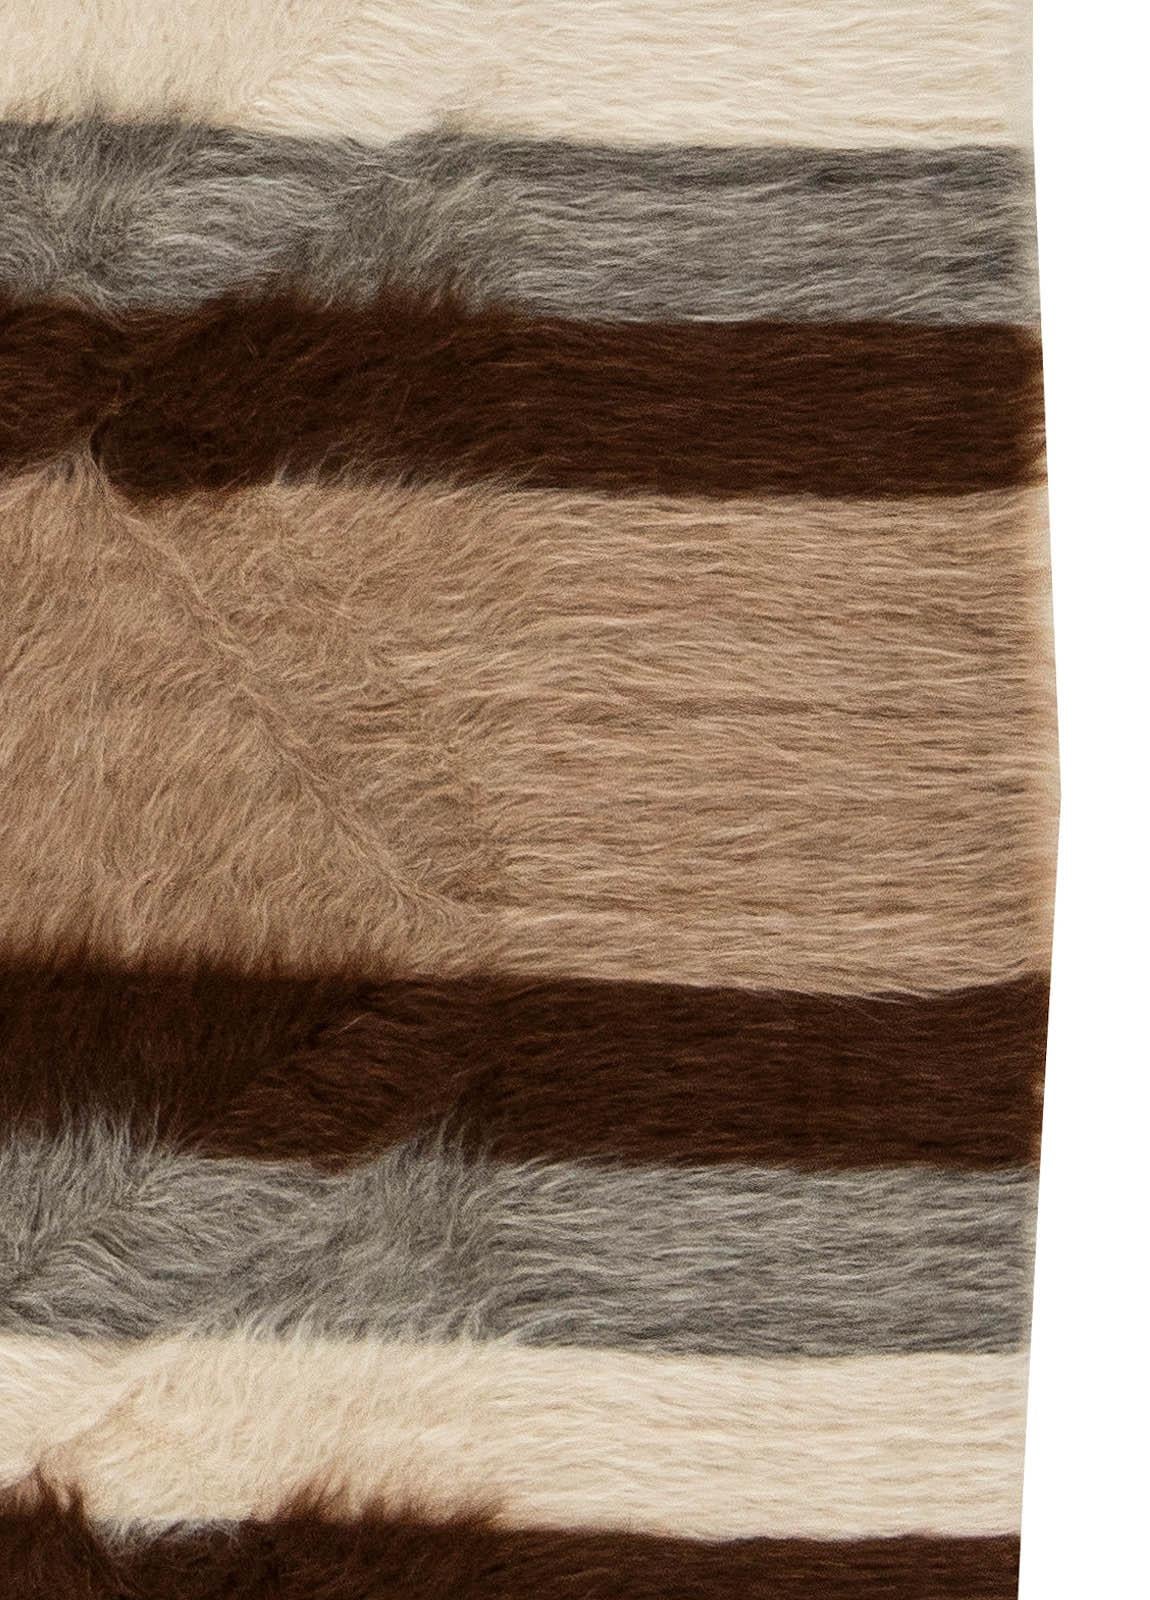 Taurus Collection Modern Striped Handmade Goat Hair Rug by Doris Leslie Blau In New Condition For Sale In New York, NY